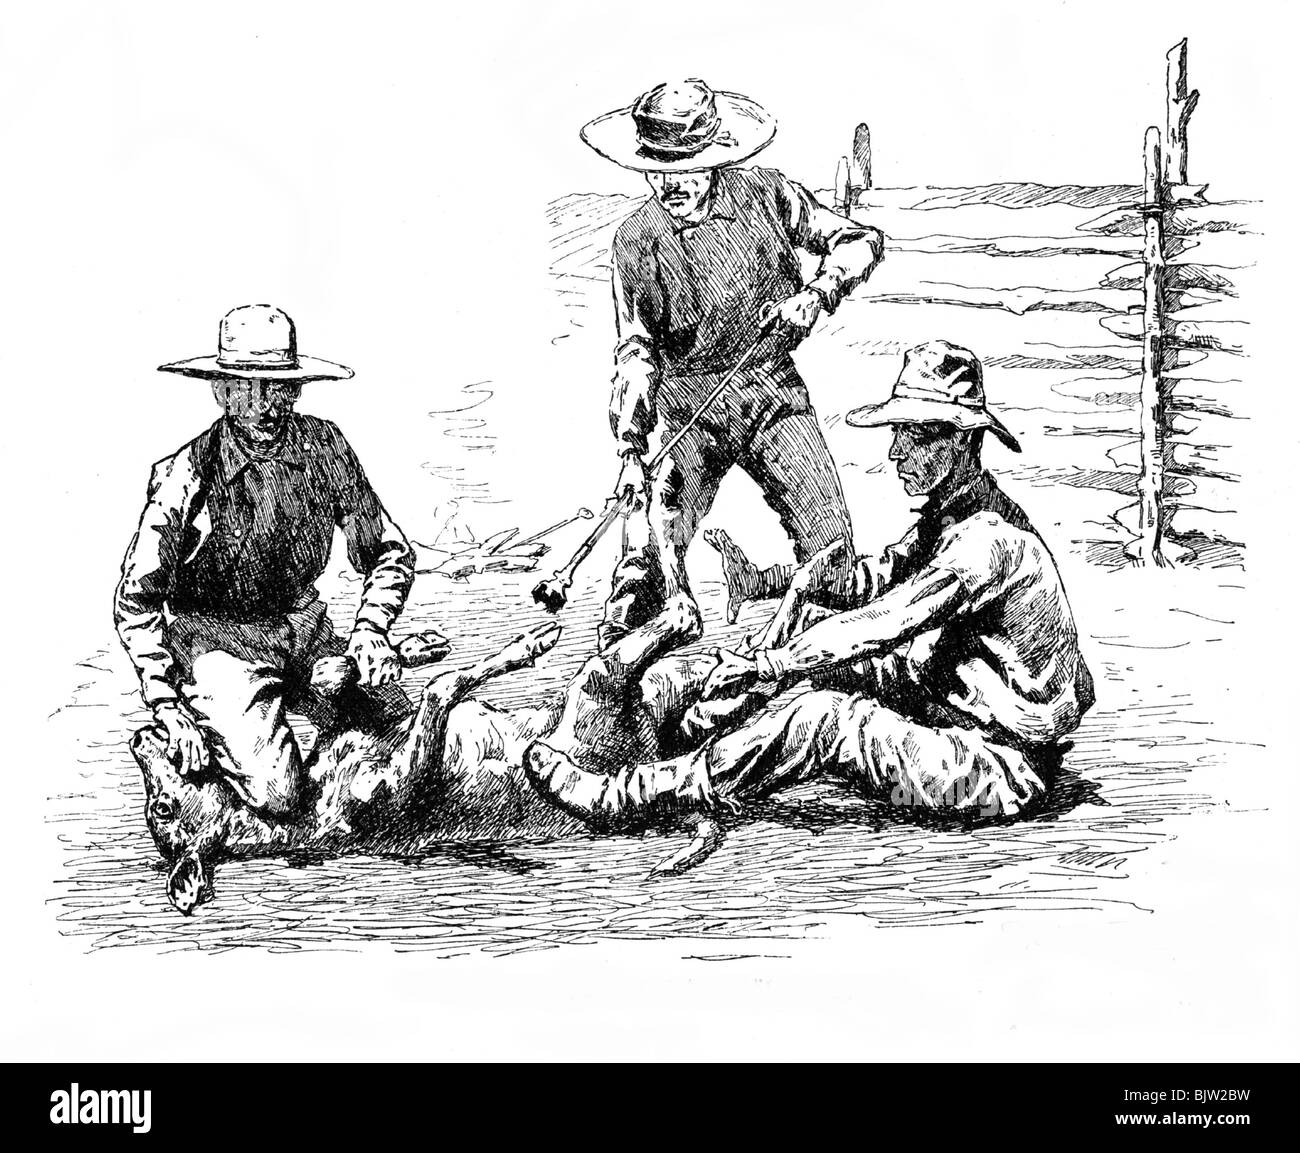 geography / travel, United States of America, people, cowboys, branding of a calf, drawing by Frederic Remington, 19th century, historic, historical, calves, branding iron, cattle, cow, bull, Wild West, pioneers, settler, settlers, profession, agriculture, stock farming, factory farming, Stock Photo